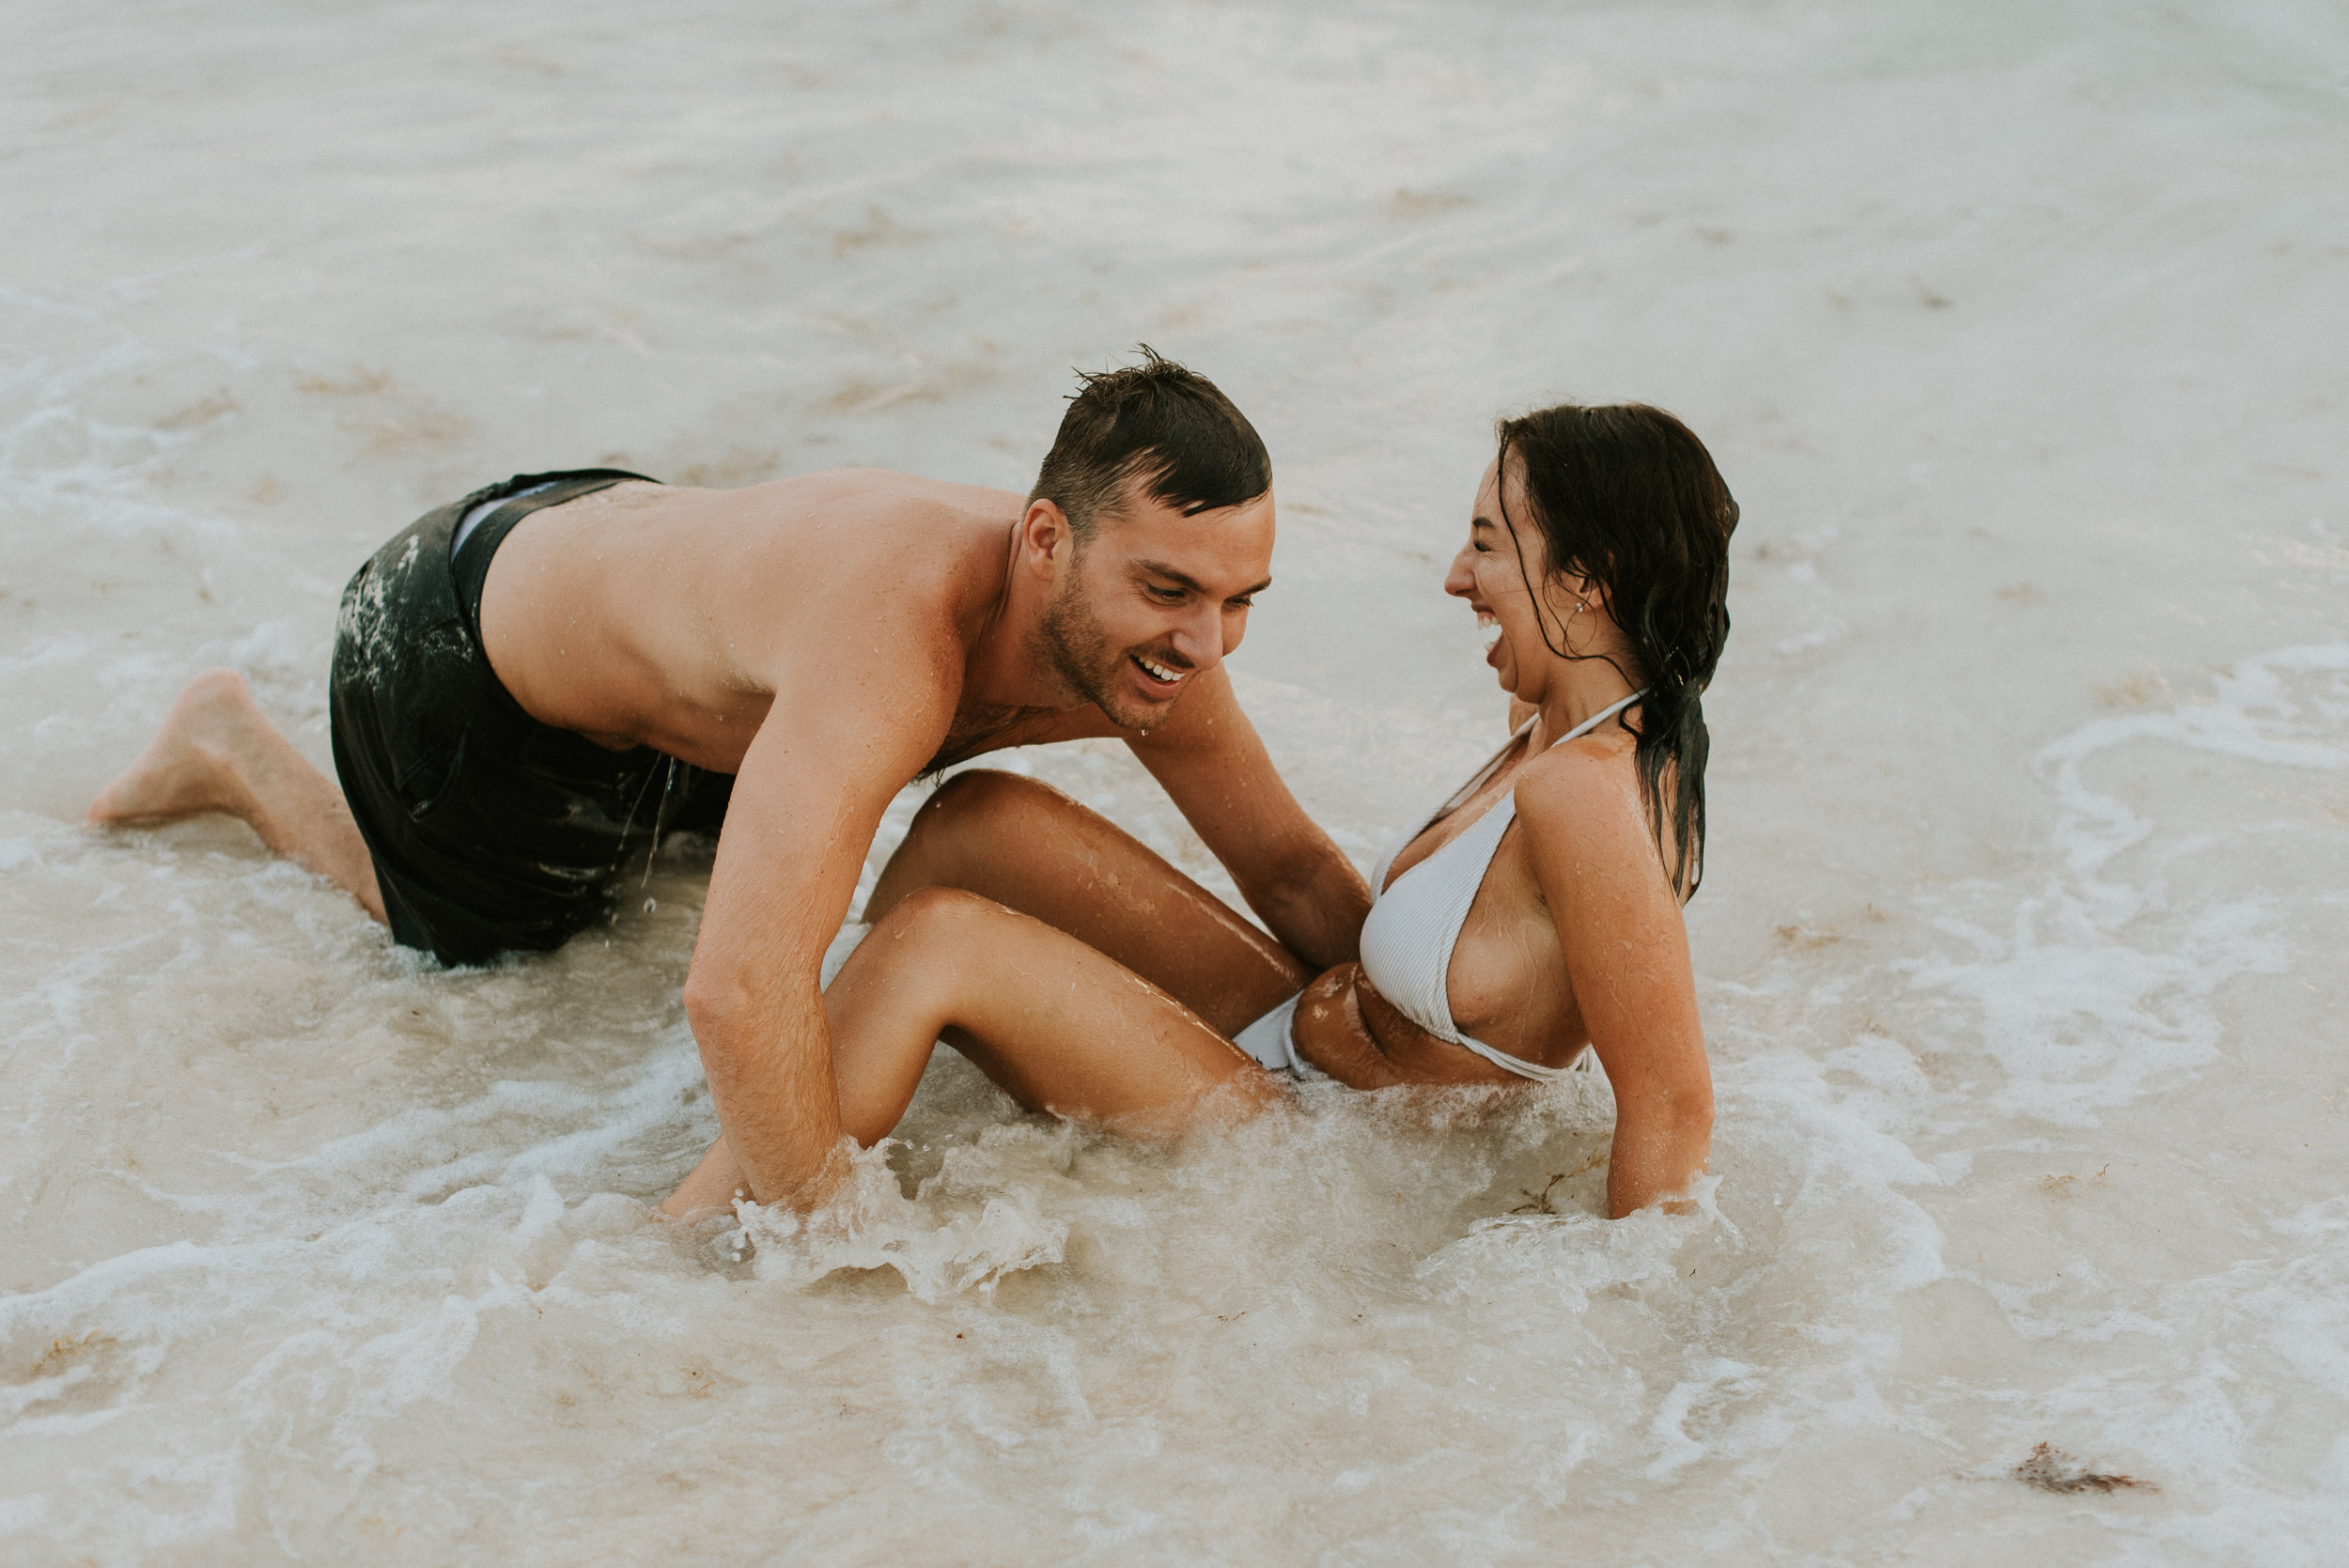 Amanda + Sean - Morning of Wedding Session - Day After Session - Punta Cana, Dominican Republic - Kamra Fuller Photography - Seattle Elopement Photographer - Destination Wedding Photographer